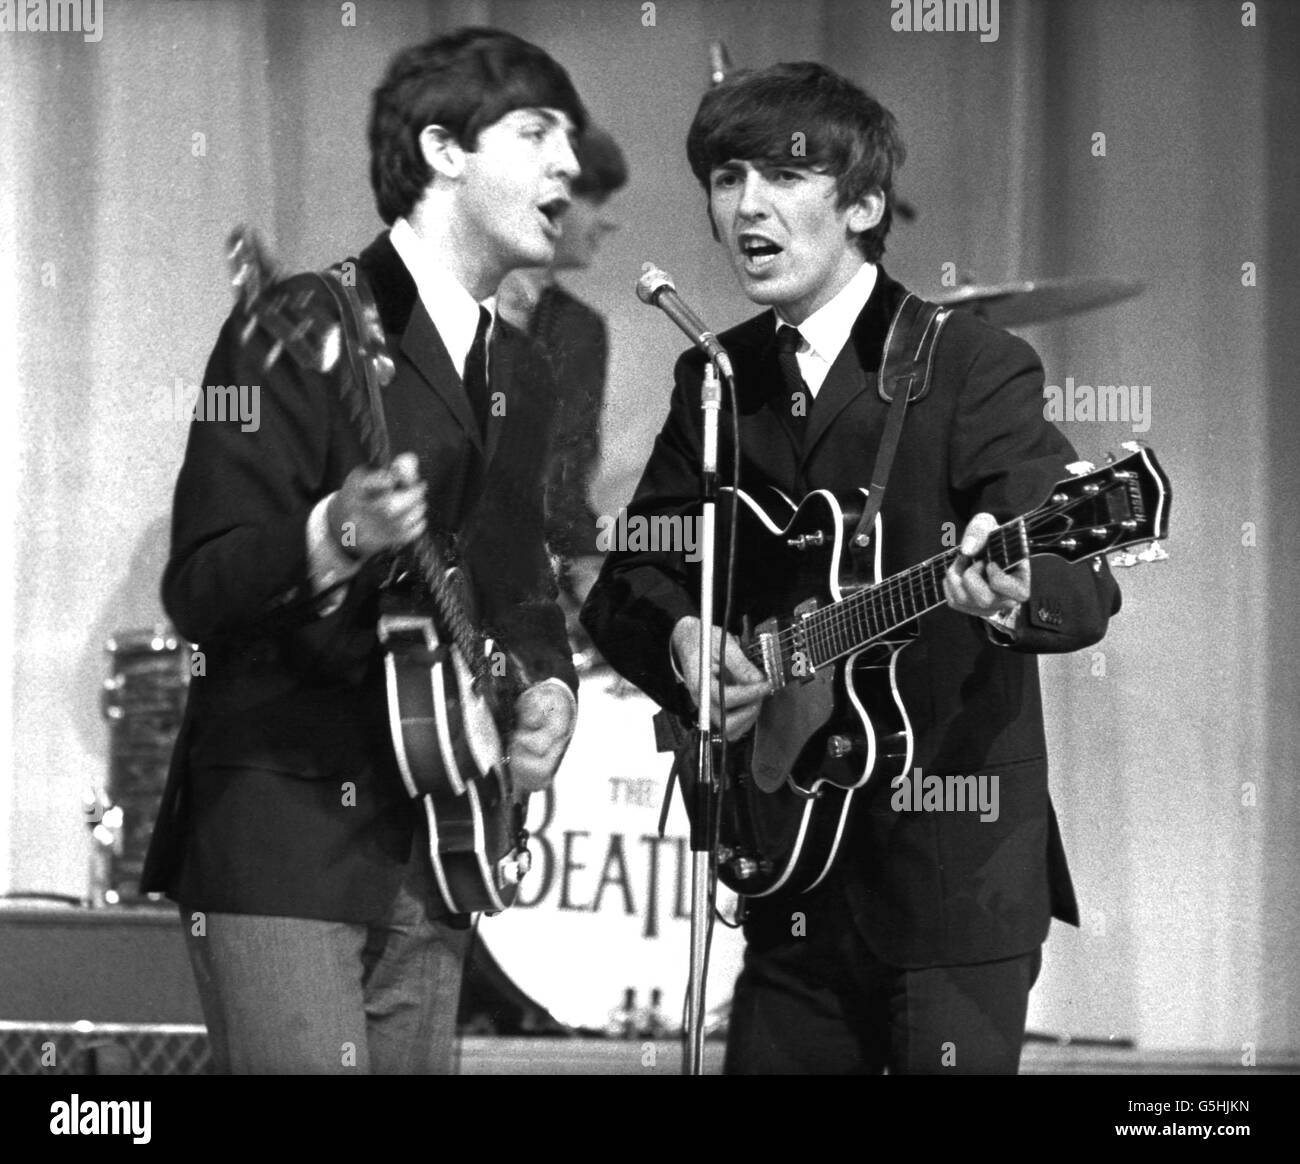 The Beatles - Rehearsals - Royal Command Performance, London Stock Photo